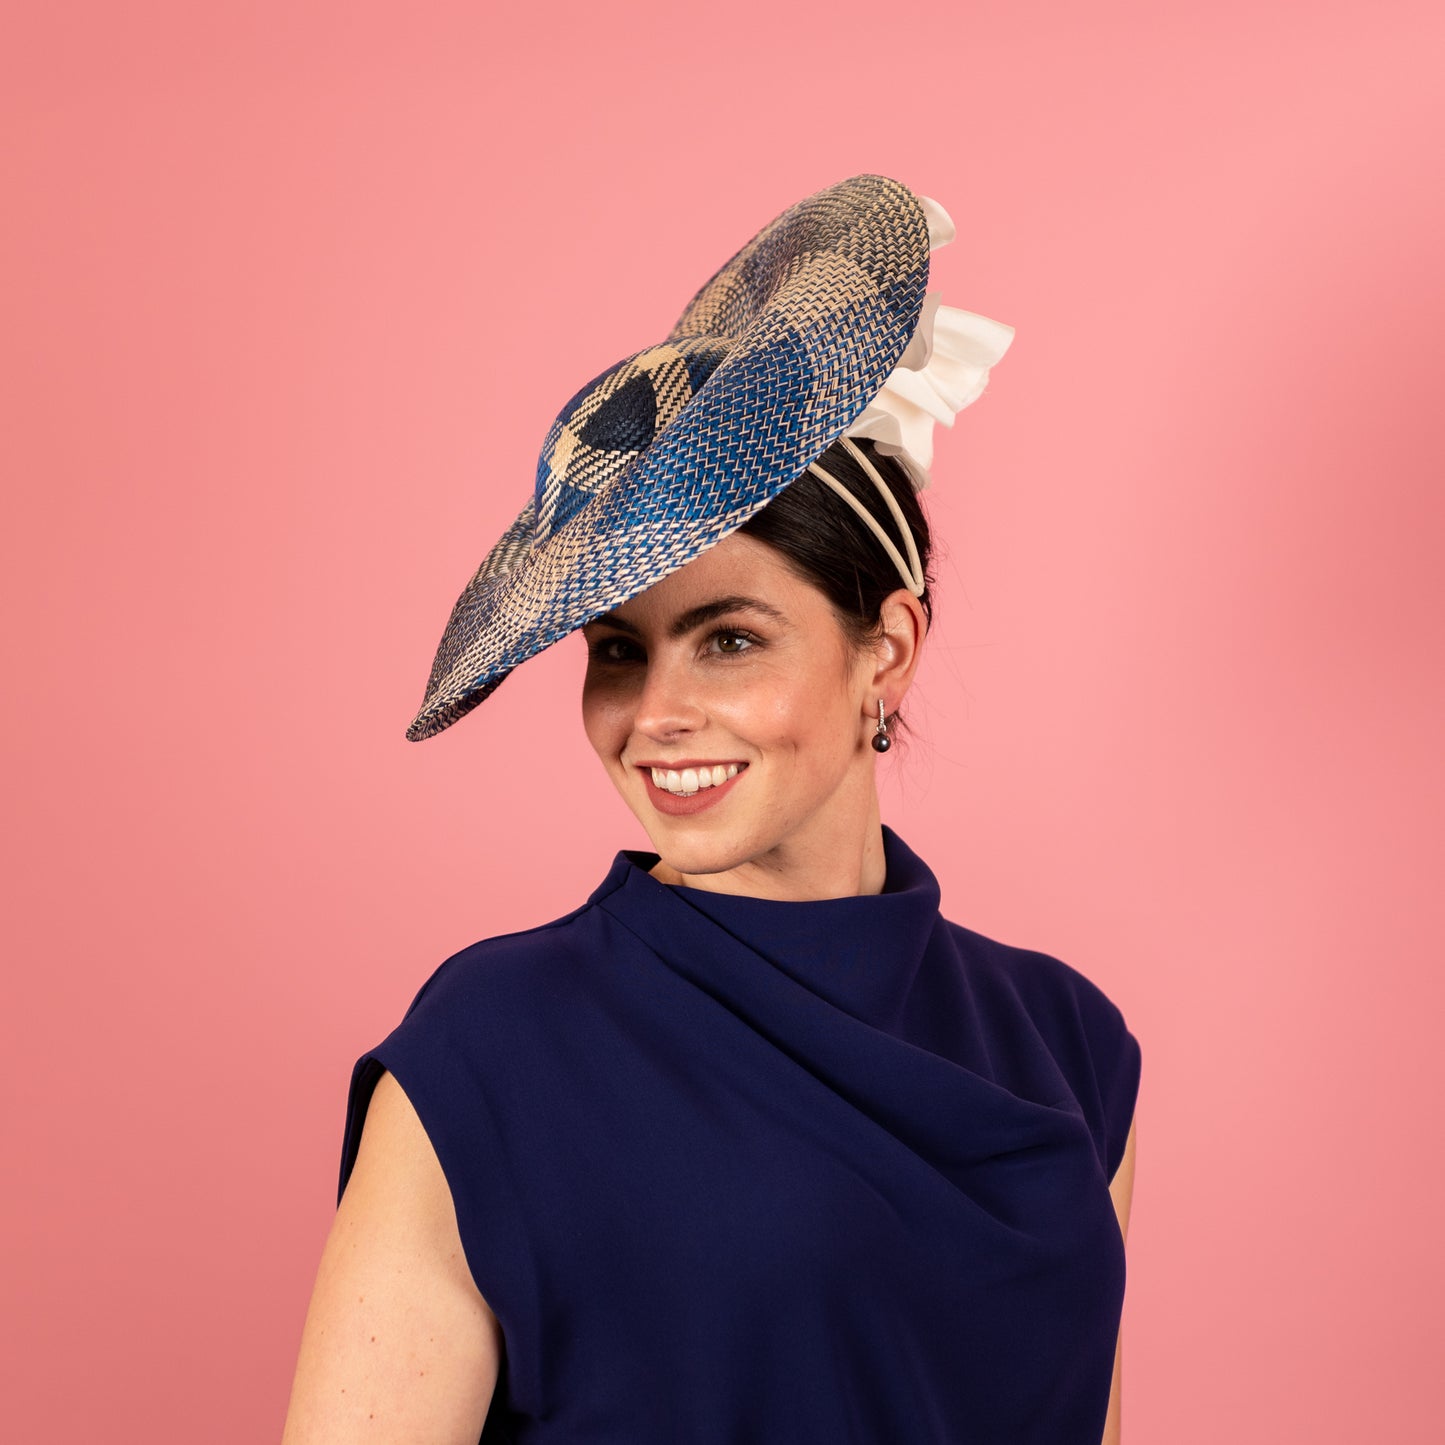 Gabriela Shaped Hat in Blue, Cream and Navy with silk poppy trim